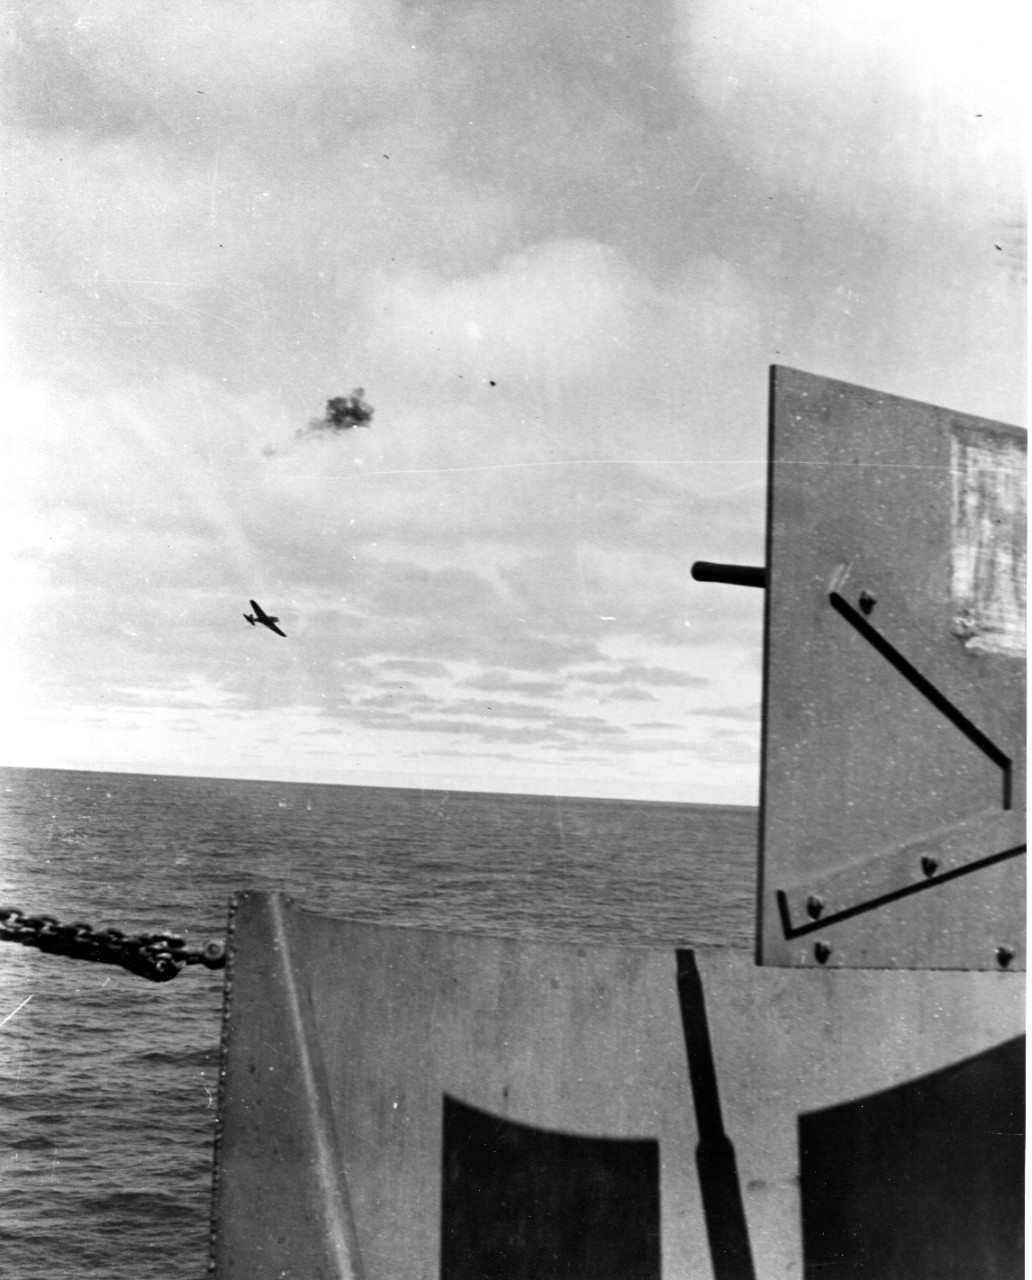 Photo #: 80-G-312006  Battle of Midway, June 1942